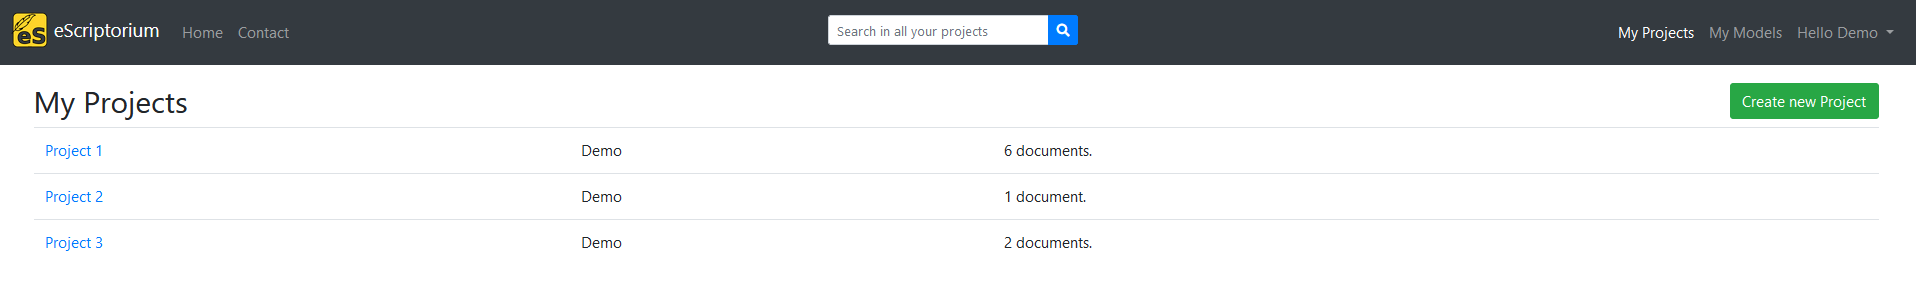 image: Screenshot of the search bar on the projects page